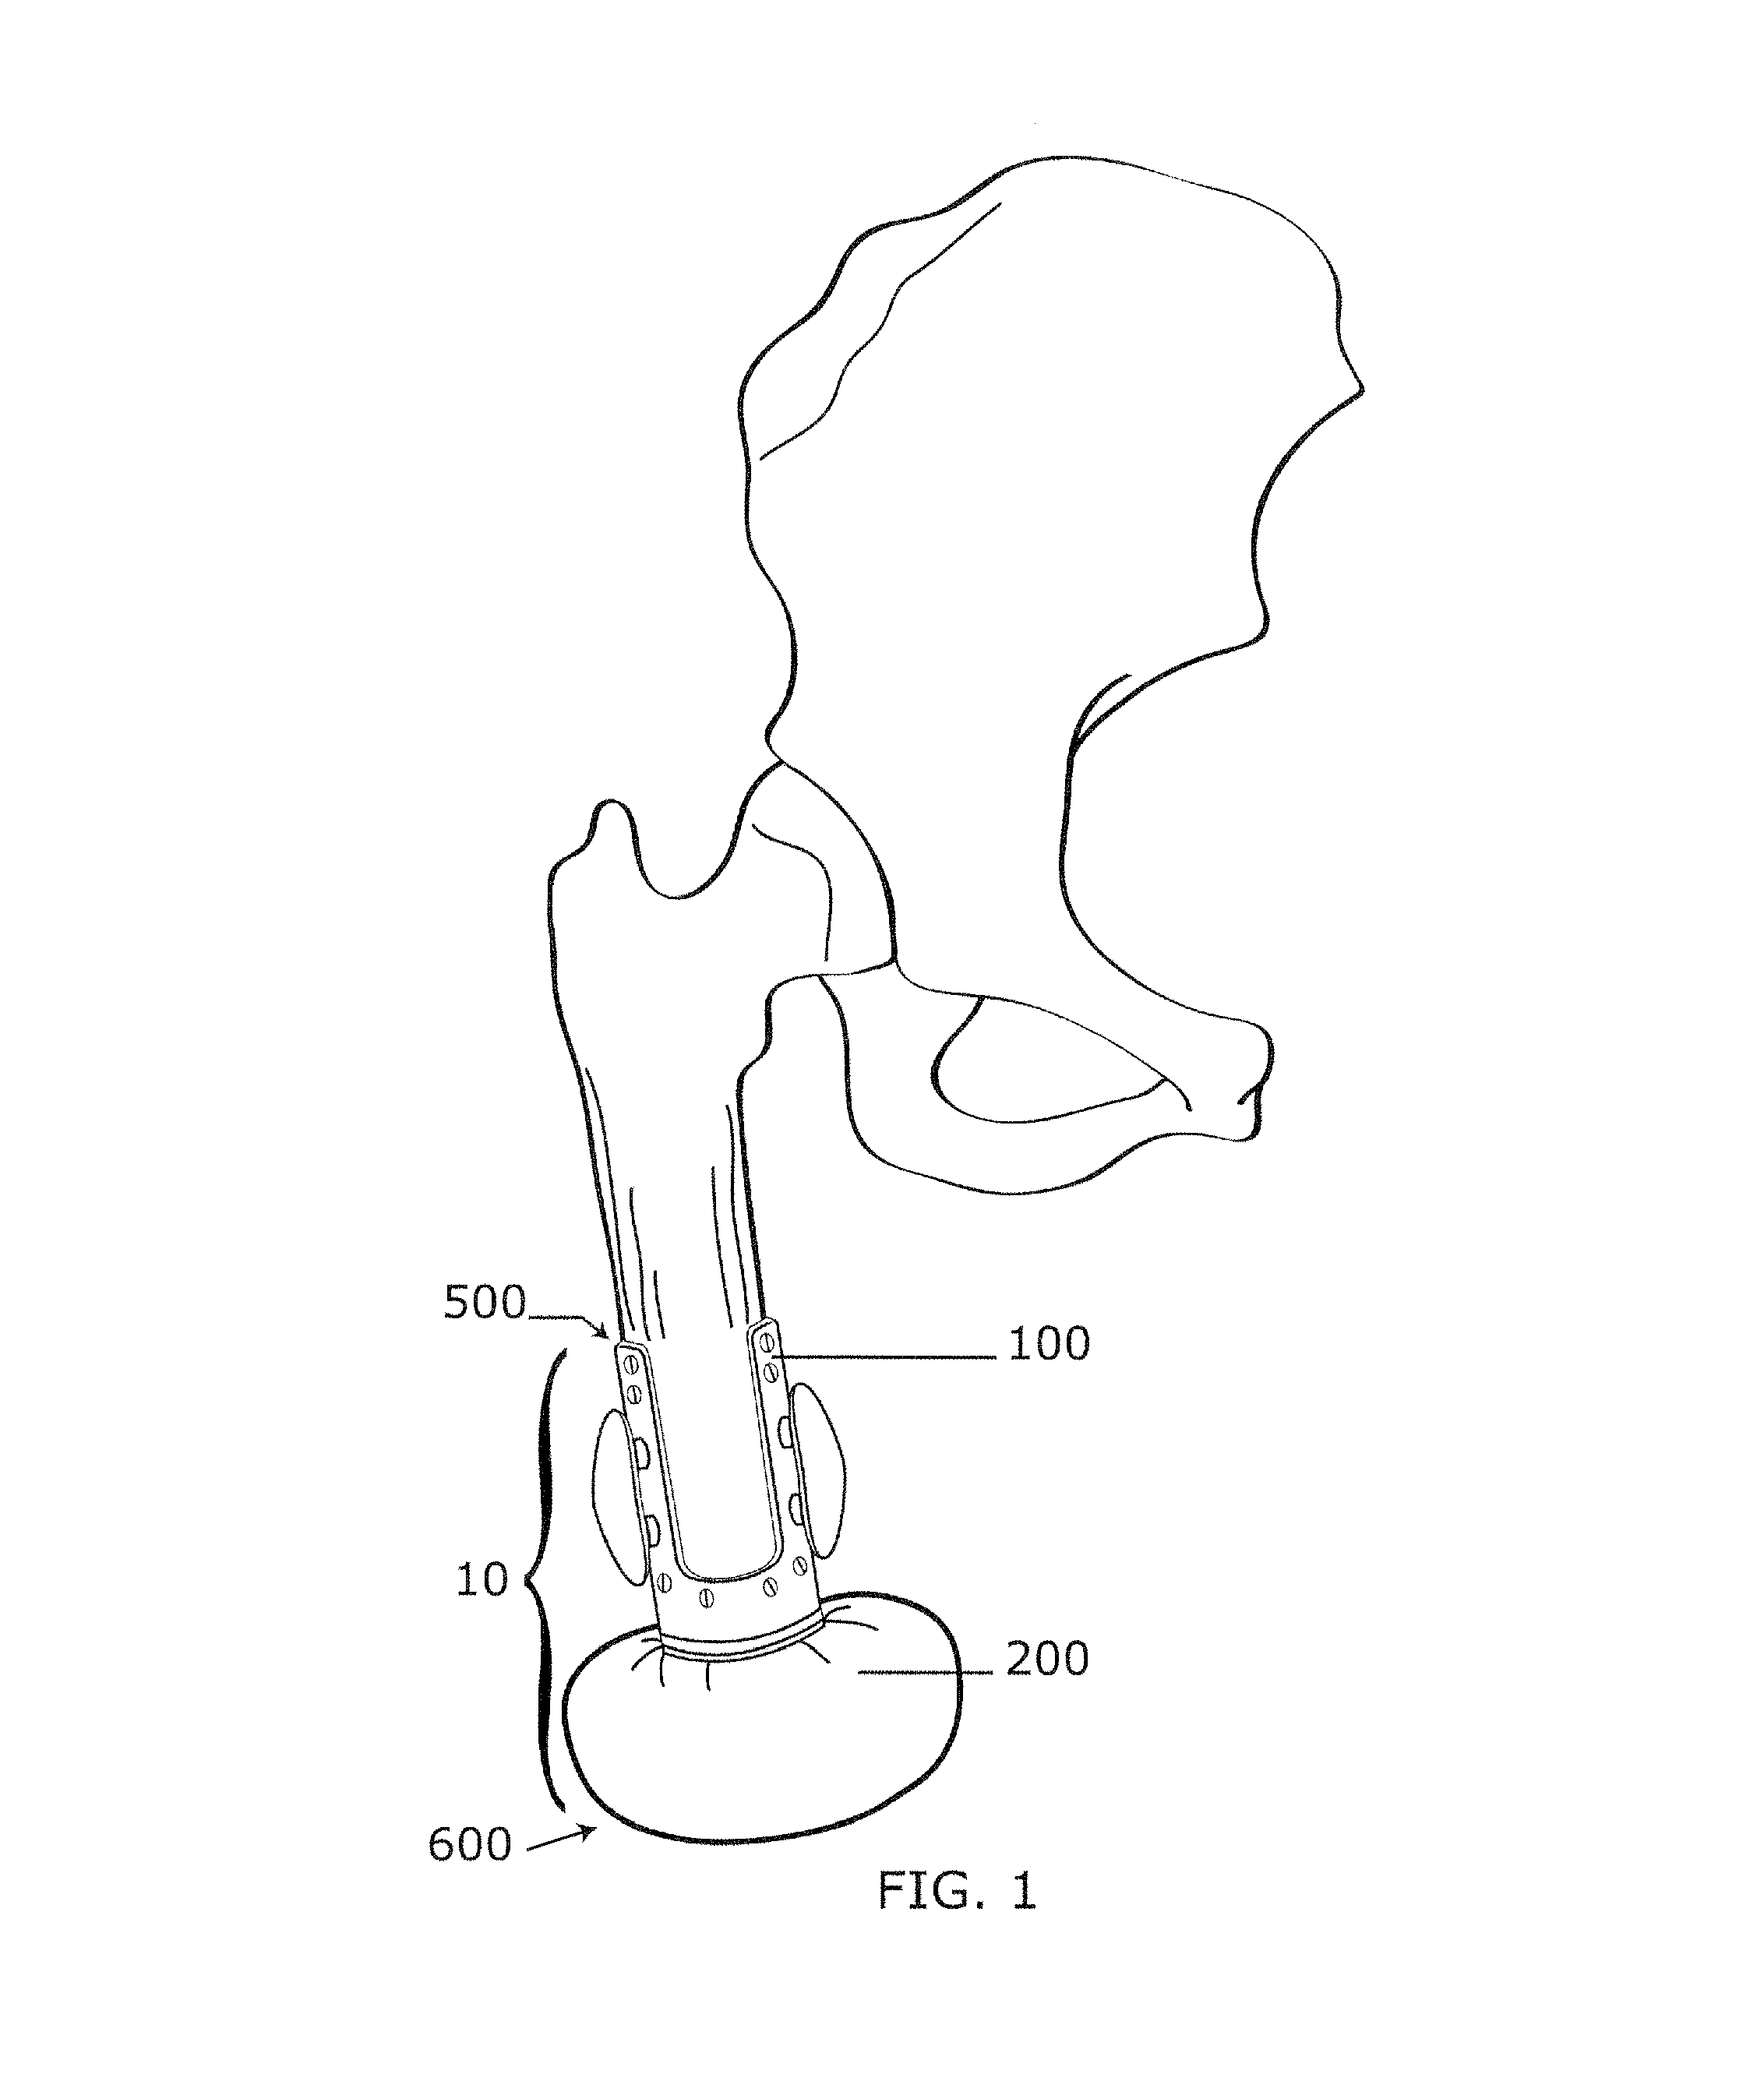 Implantable Prosthetic Device For Distribution Of Weight On Amputated Limb And Method Of Use With An External Prosthetic Device